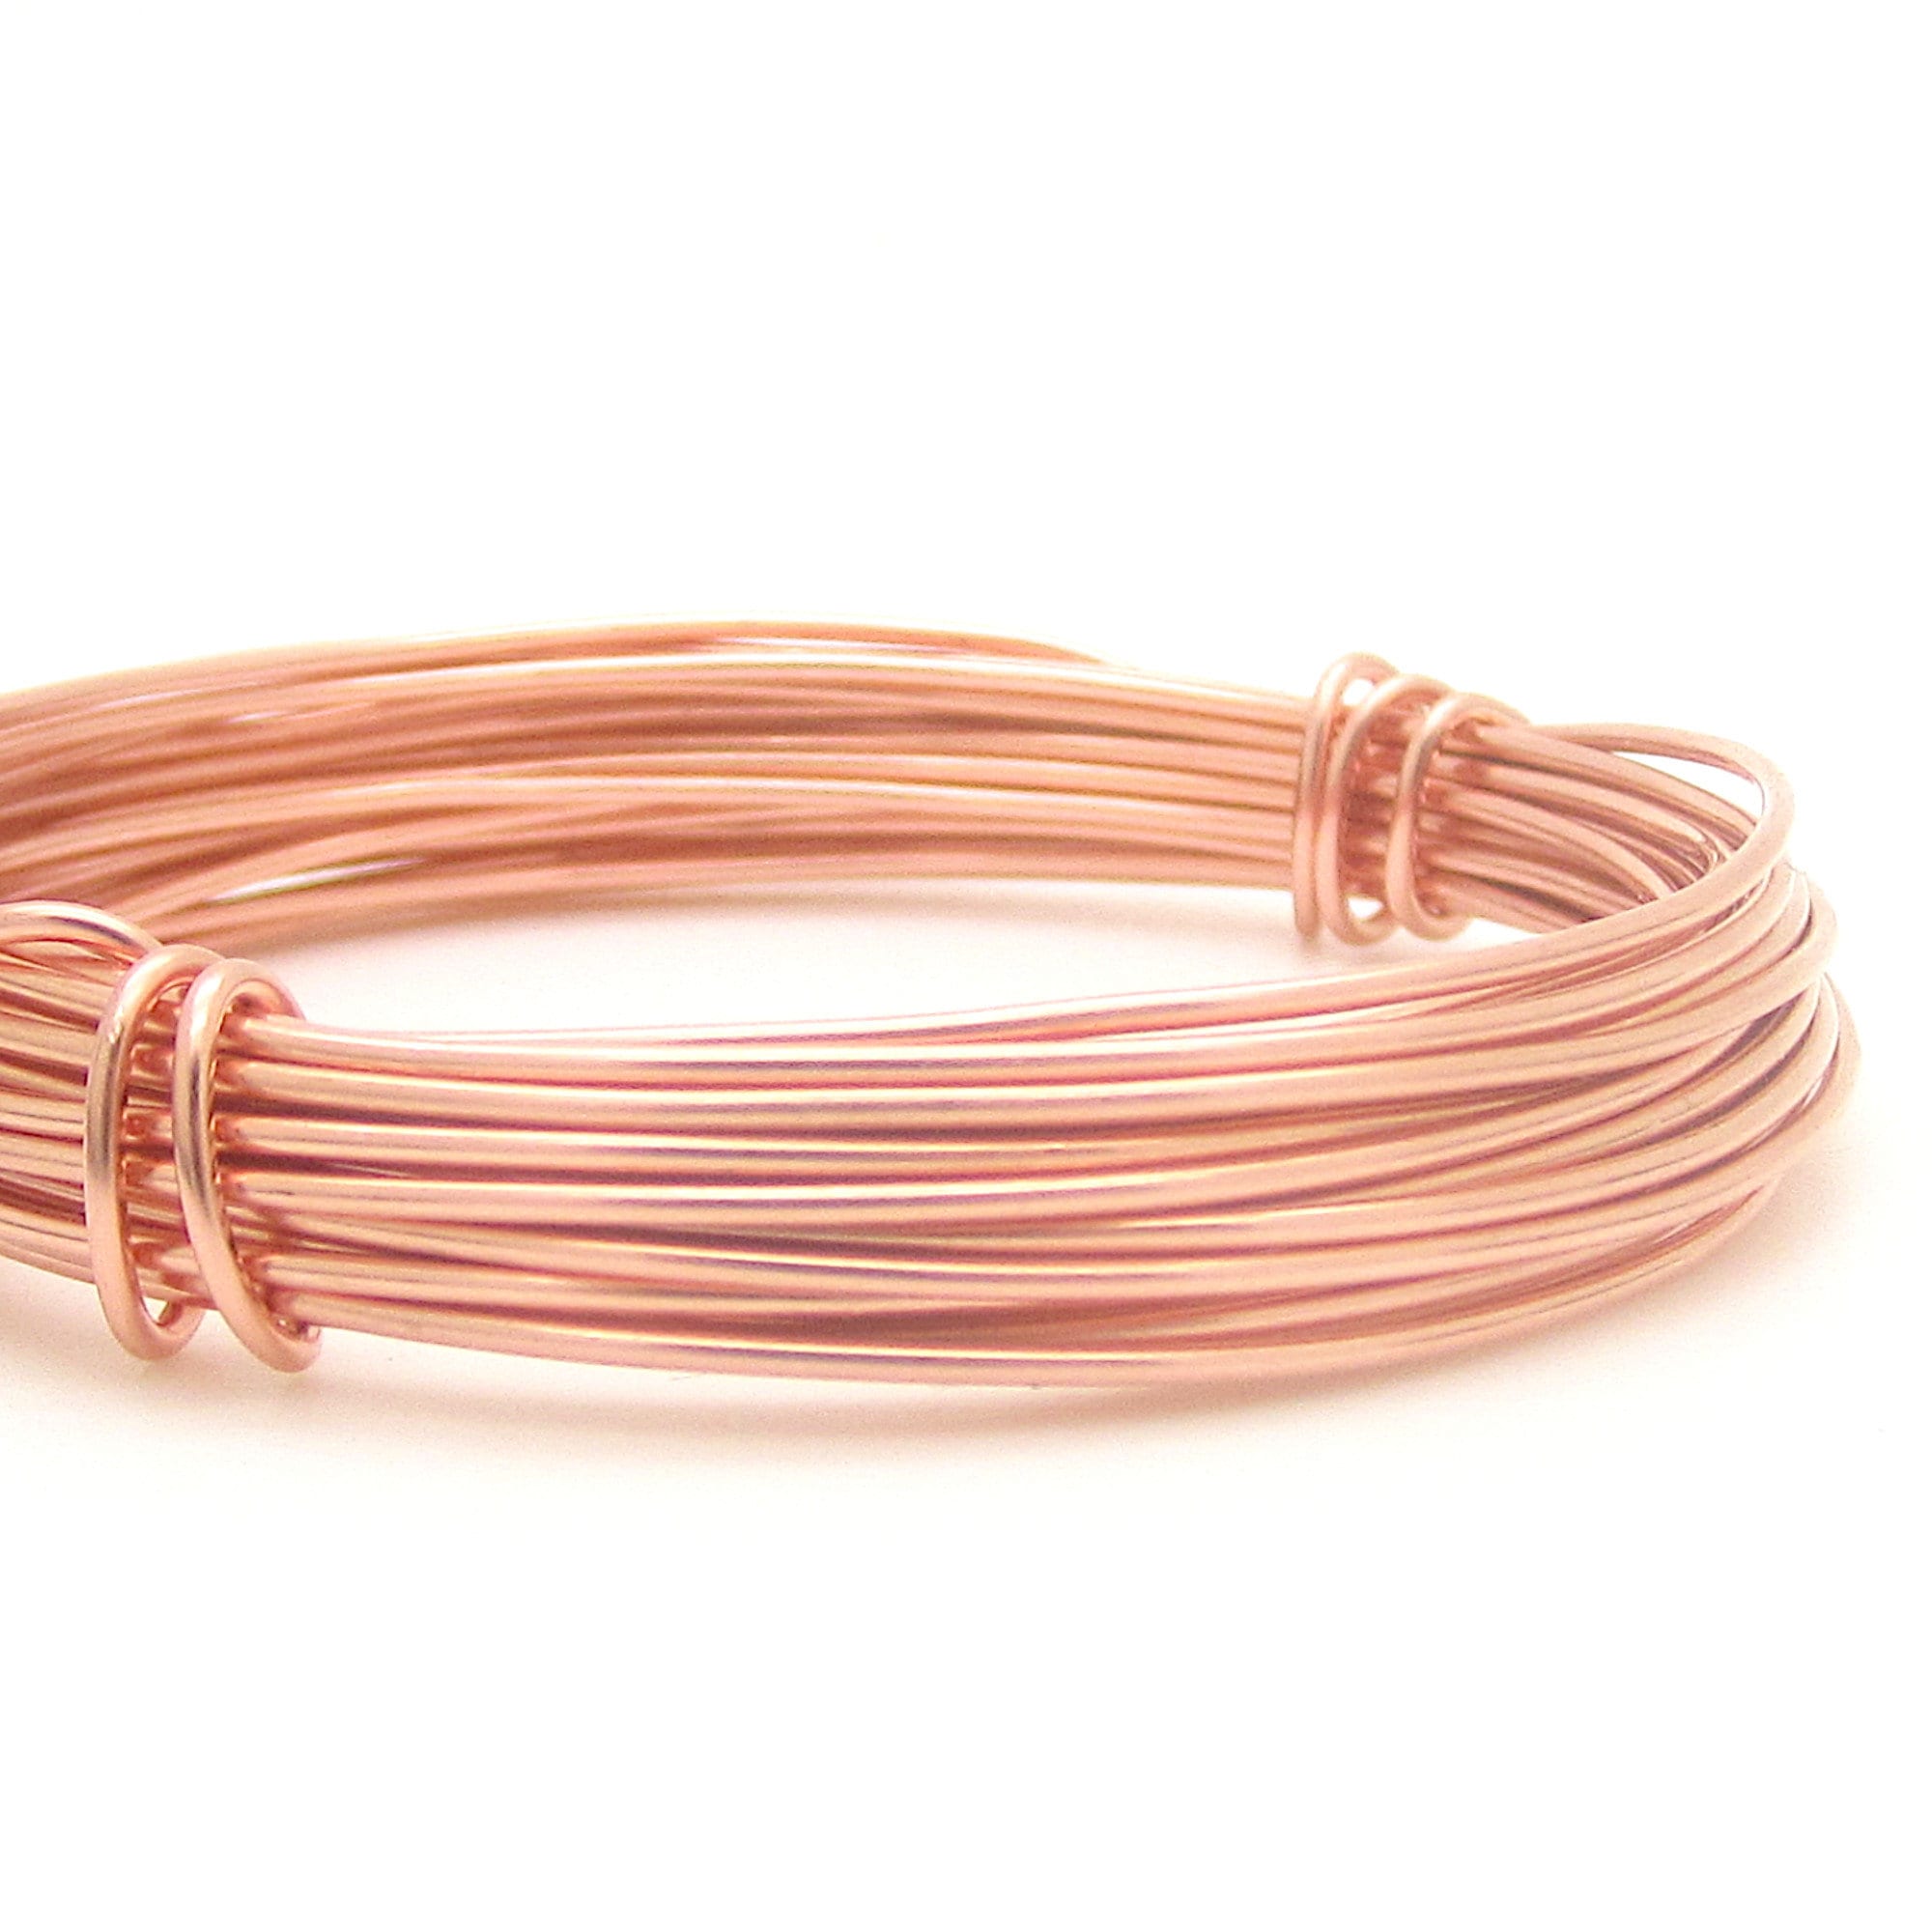 1000 grams COPPER round ENAMELED Electric wire 26 GAUGE wrap cord jewelry  making